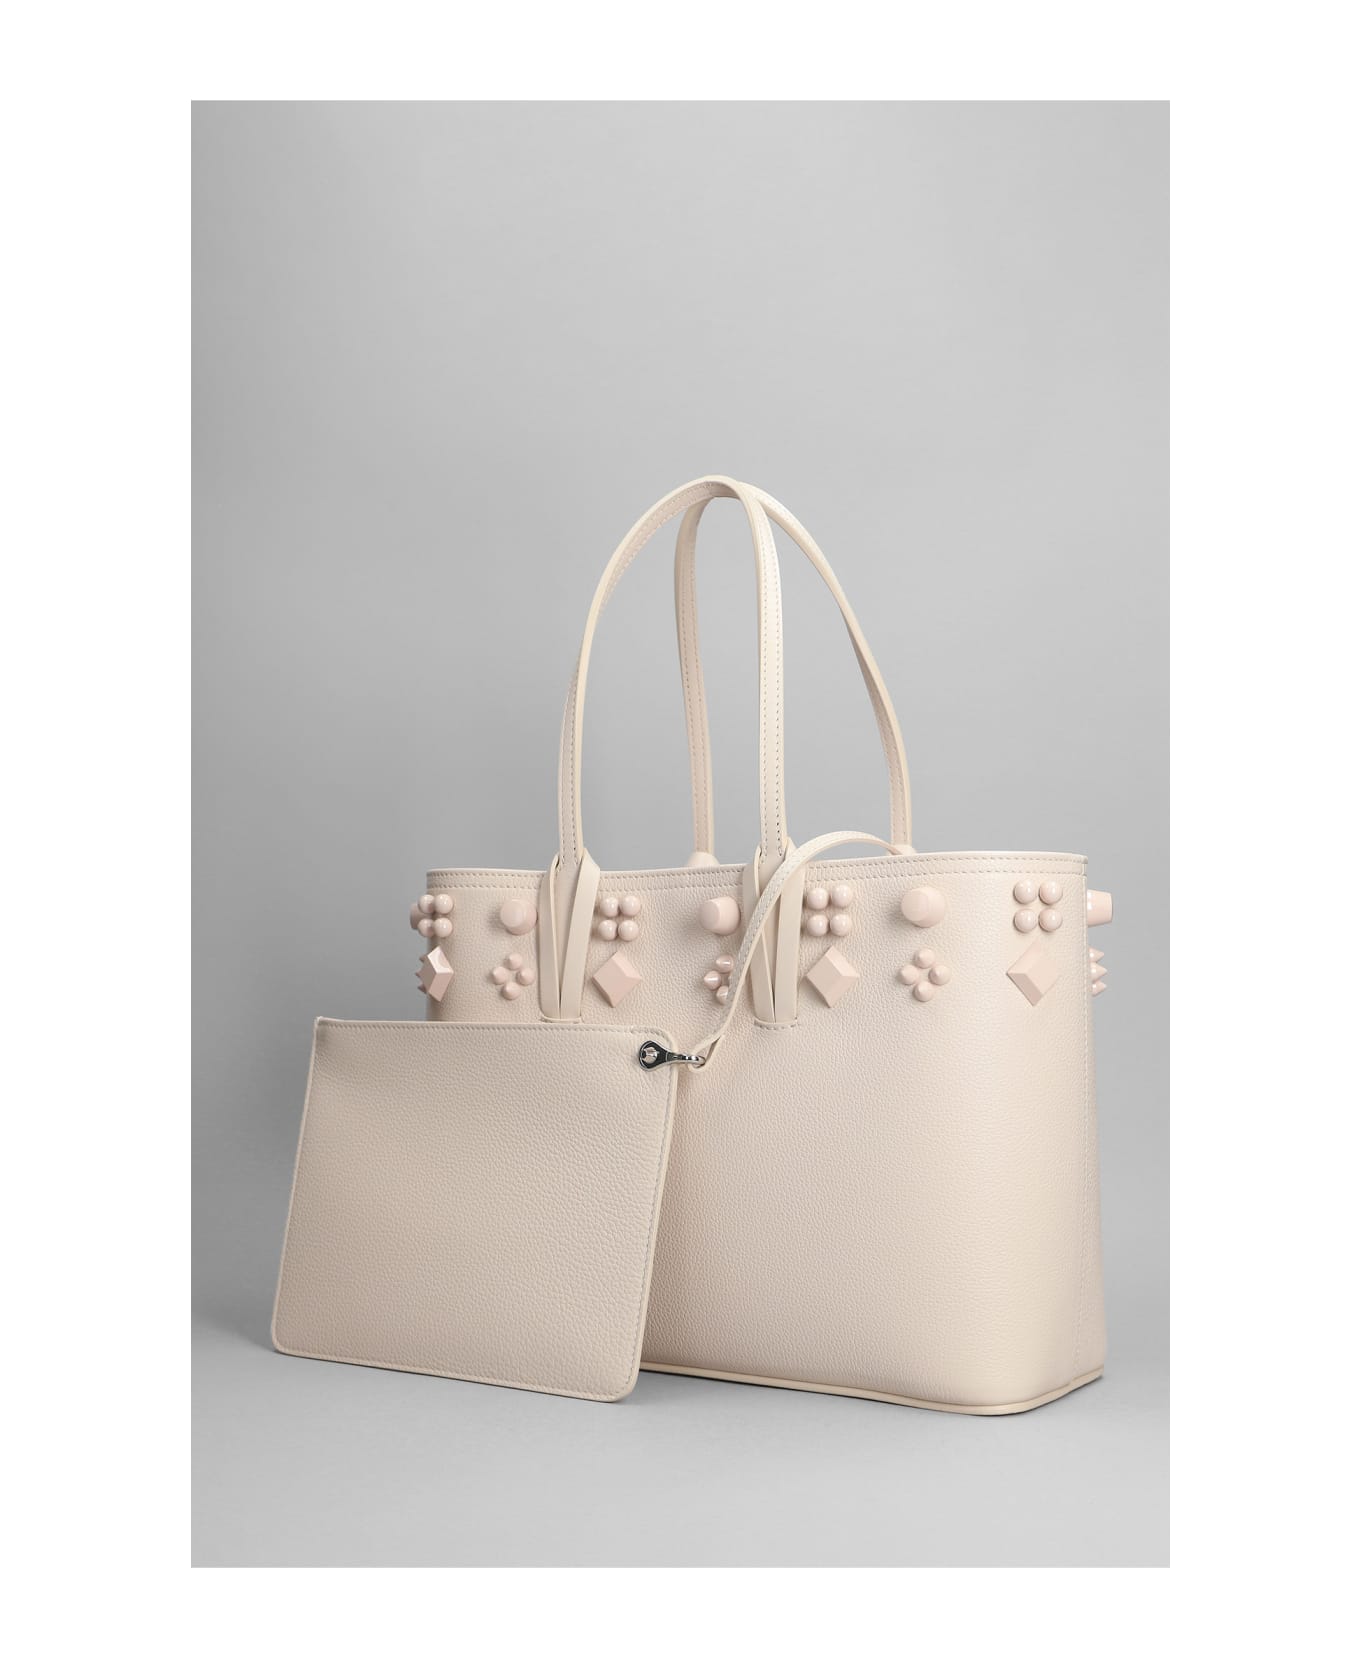 Christian Louboutin Cabata Tote In Powder Leather - Nude & Neutrals トートバッグ